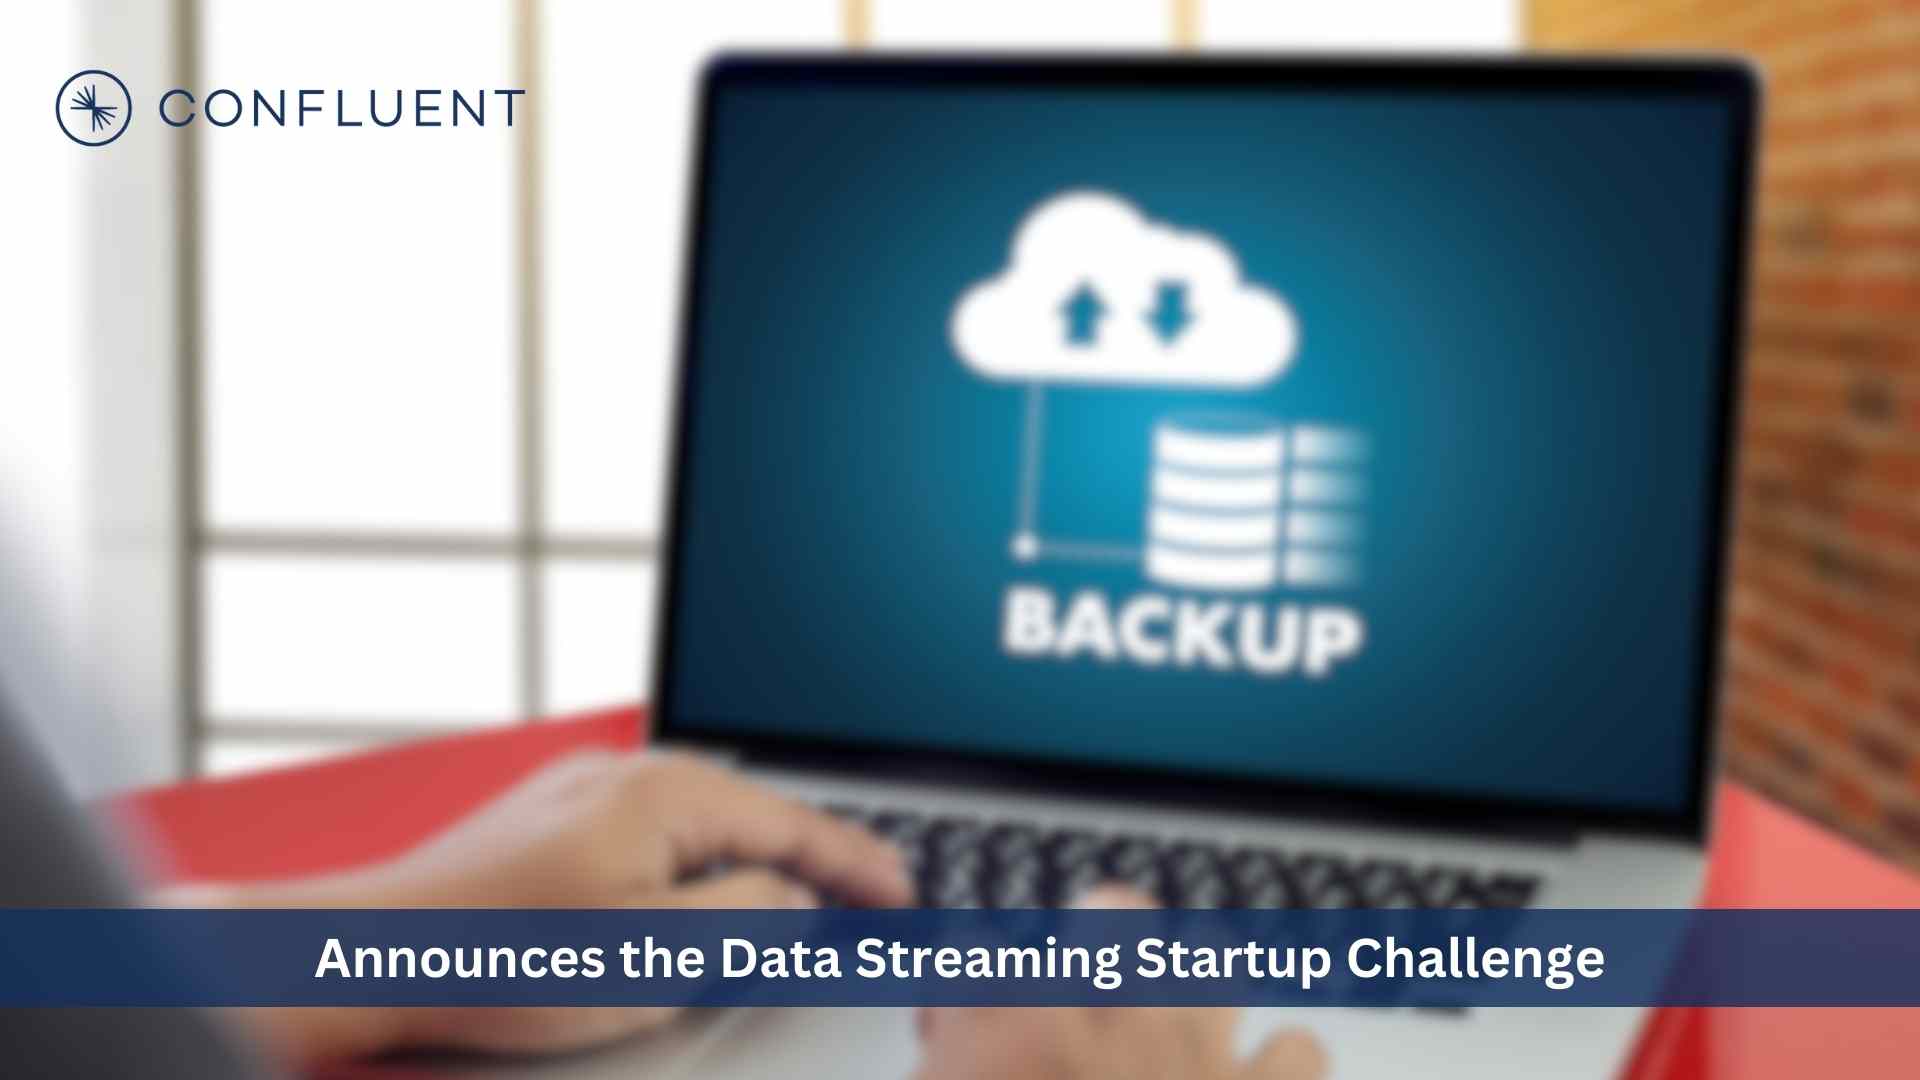 Confluent Announces the Data Streaming Startup Challenge